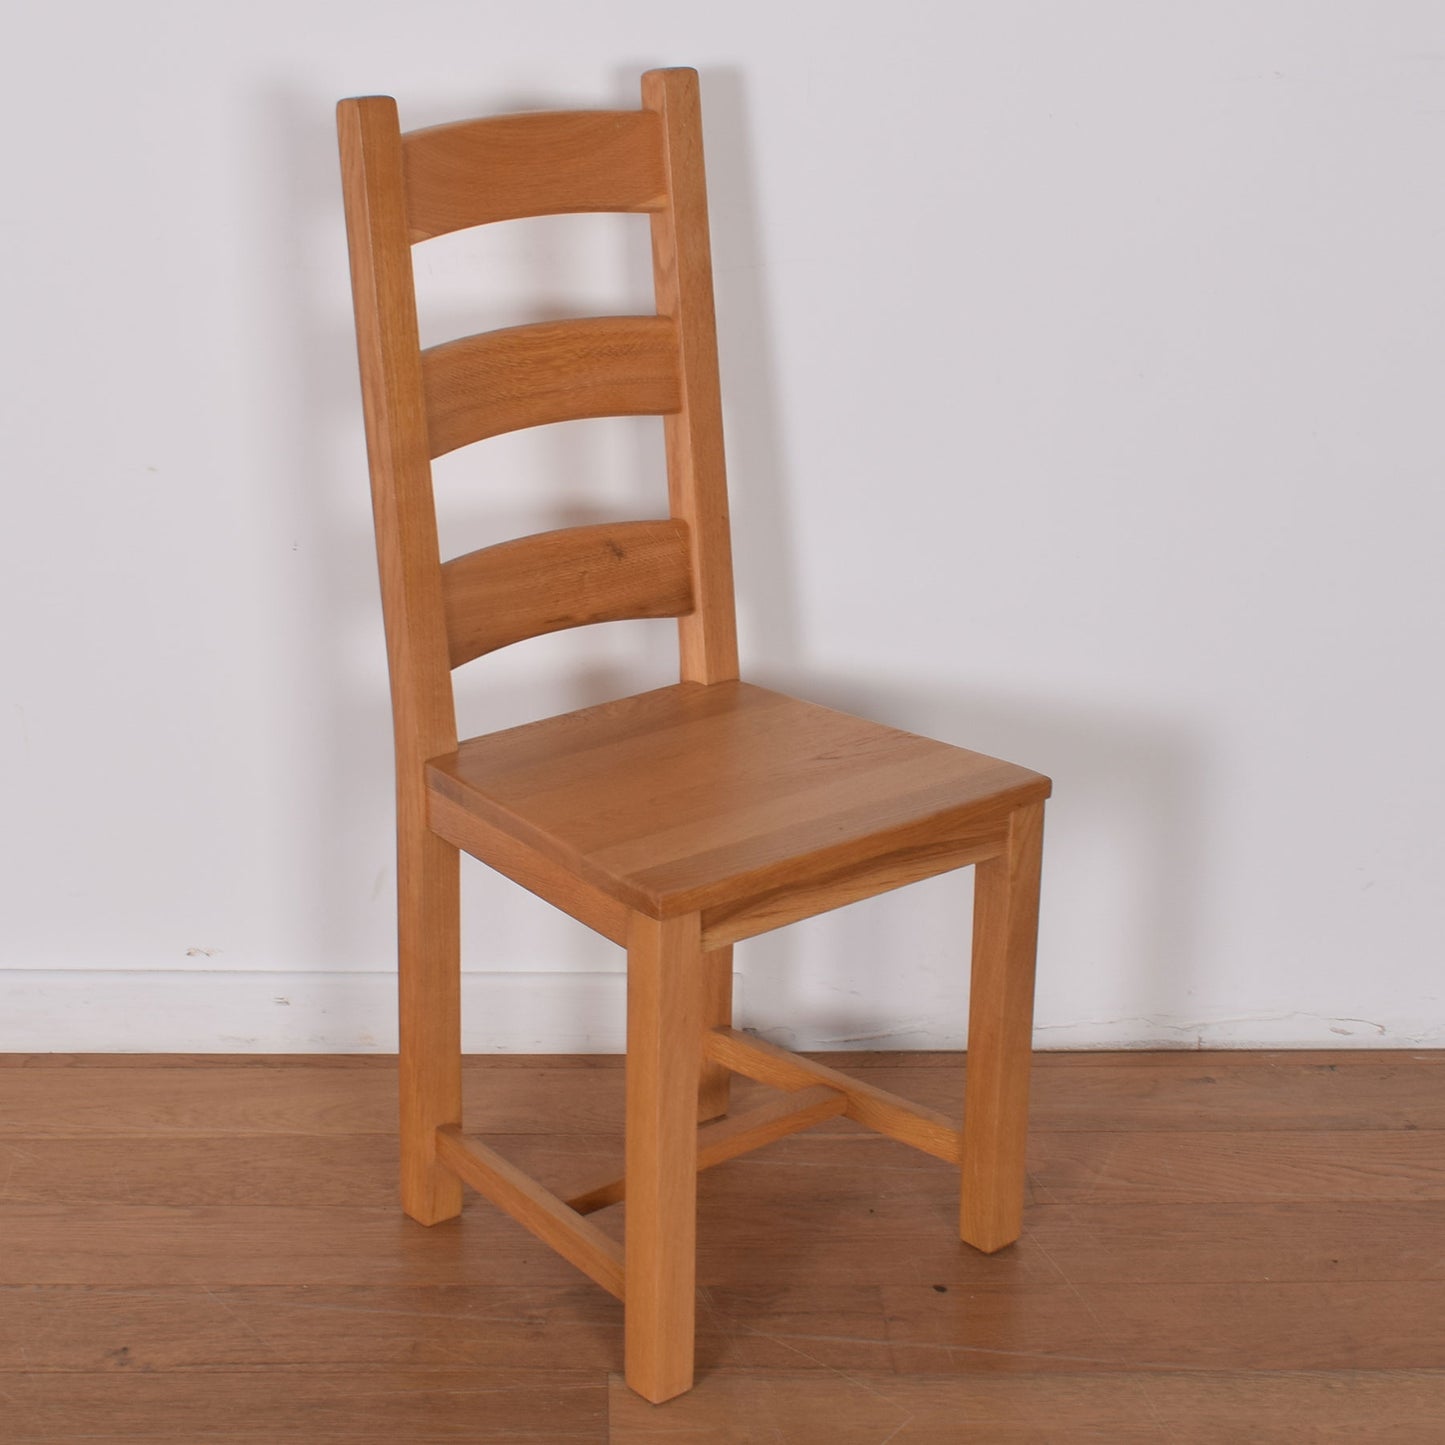 Light Oak Table with Six Chairs